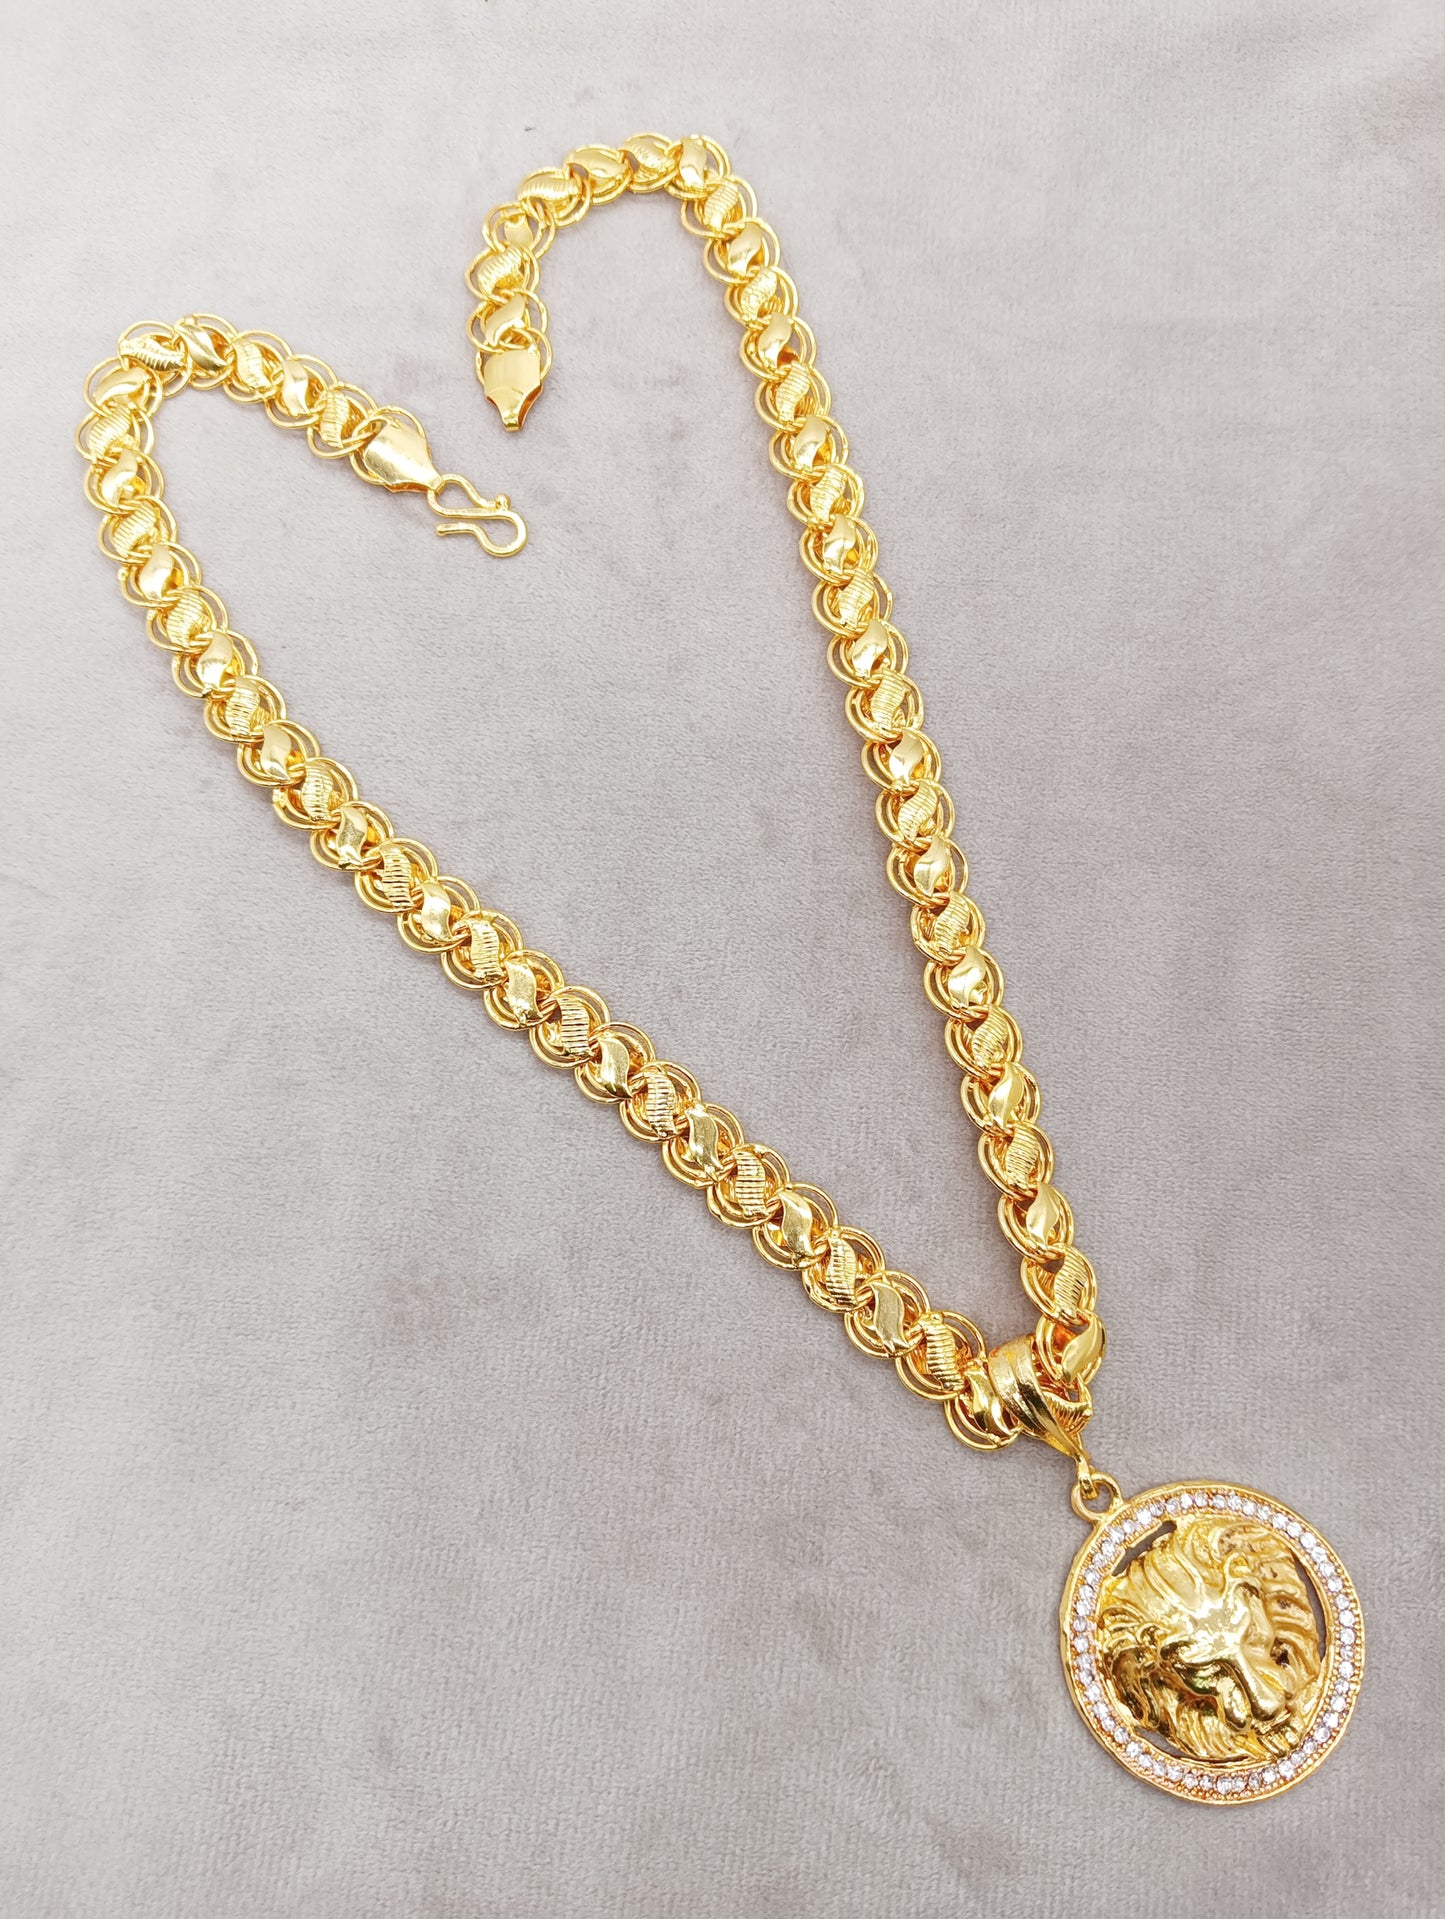 Luxurious Men's Gold Plated Lion Pendant With Chain